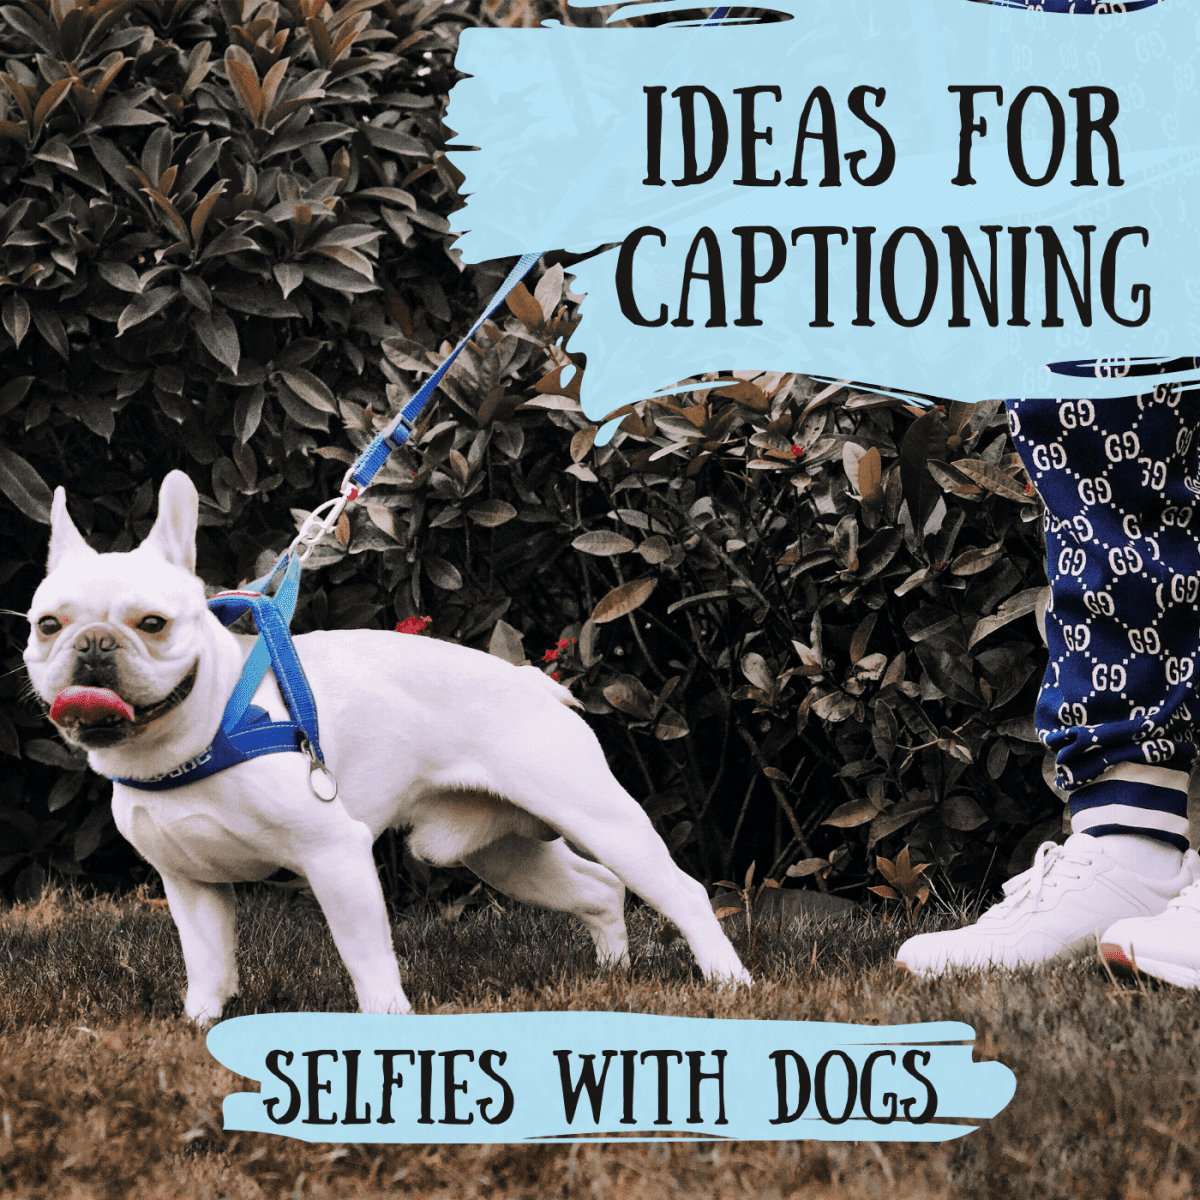 100+ Best Captions for Selfies With Dogs - TurboFuture